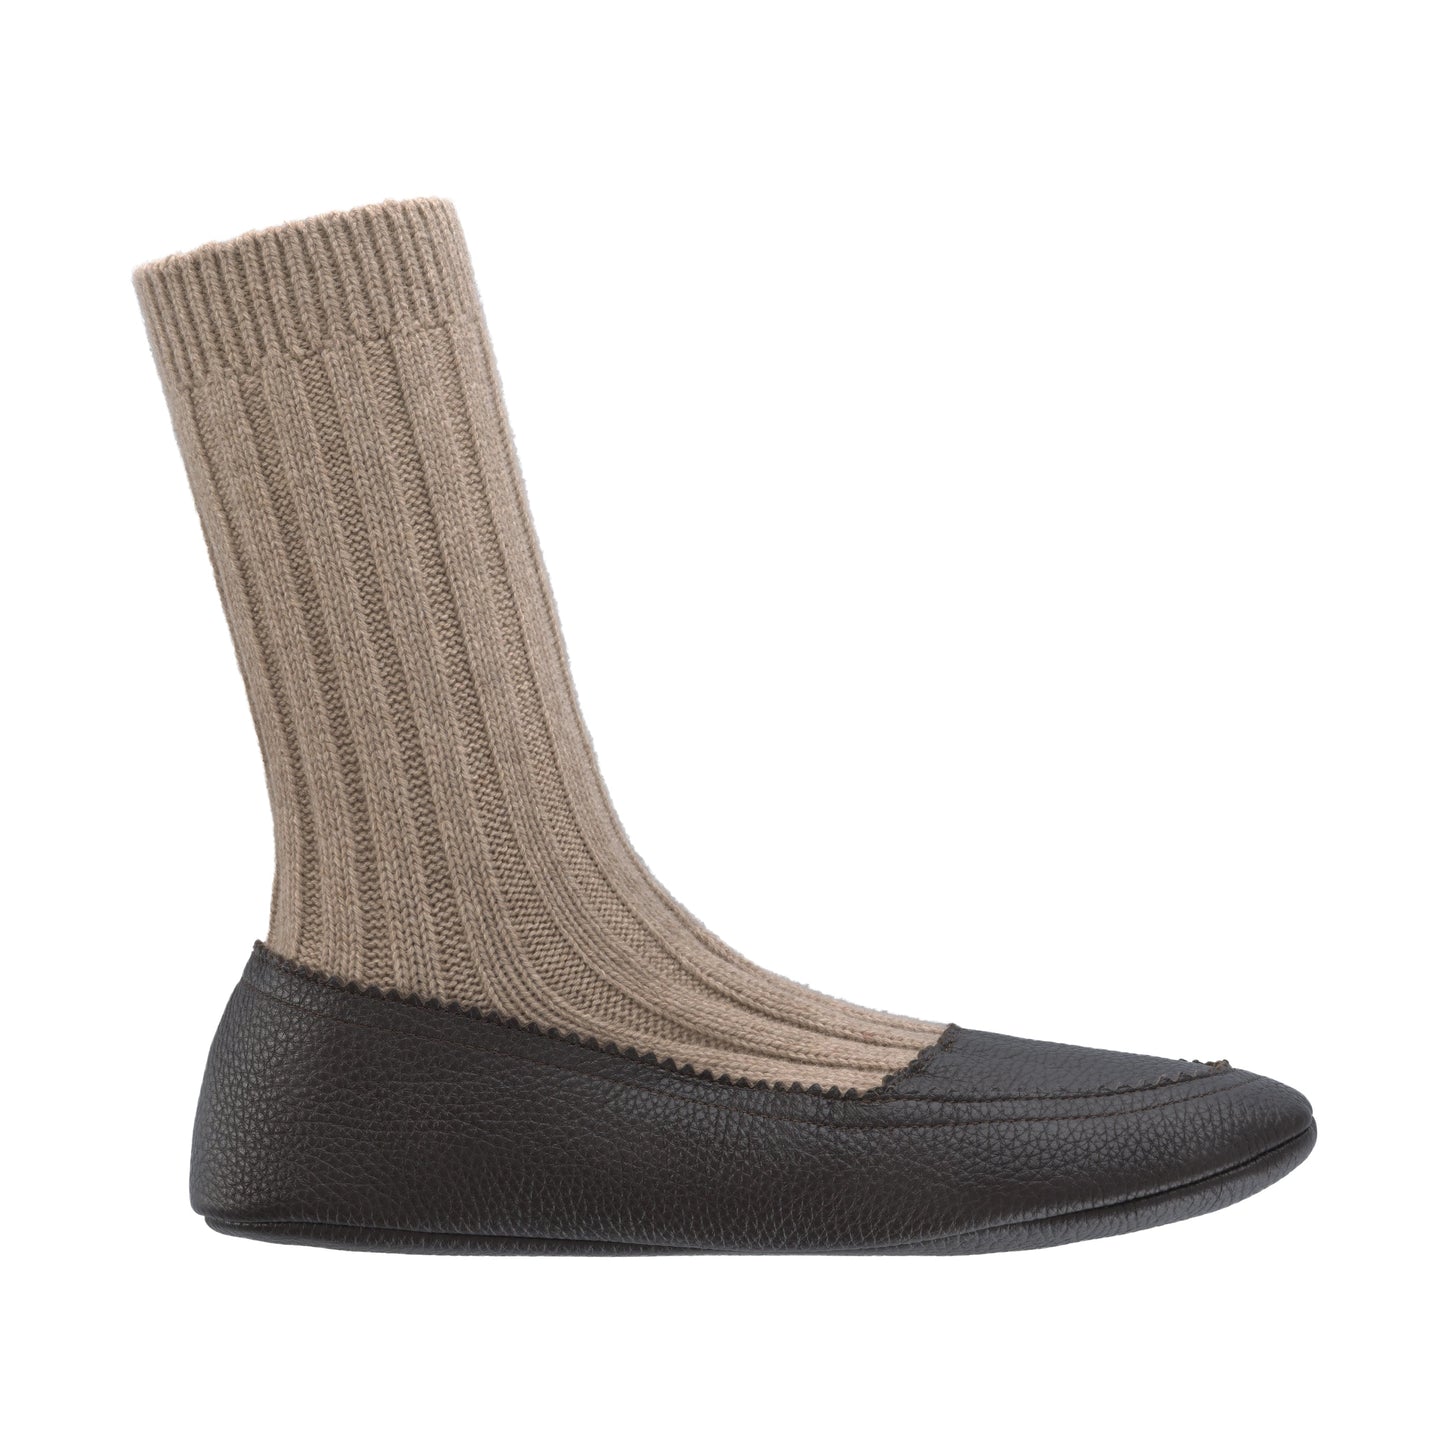 Bresciani Deer and Cashmere Slippers in Brown Ciocco - SARTALE